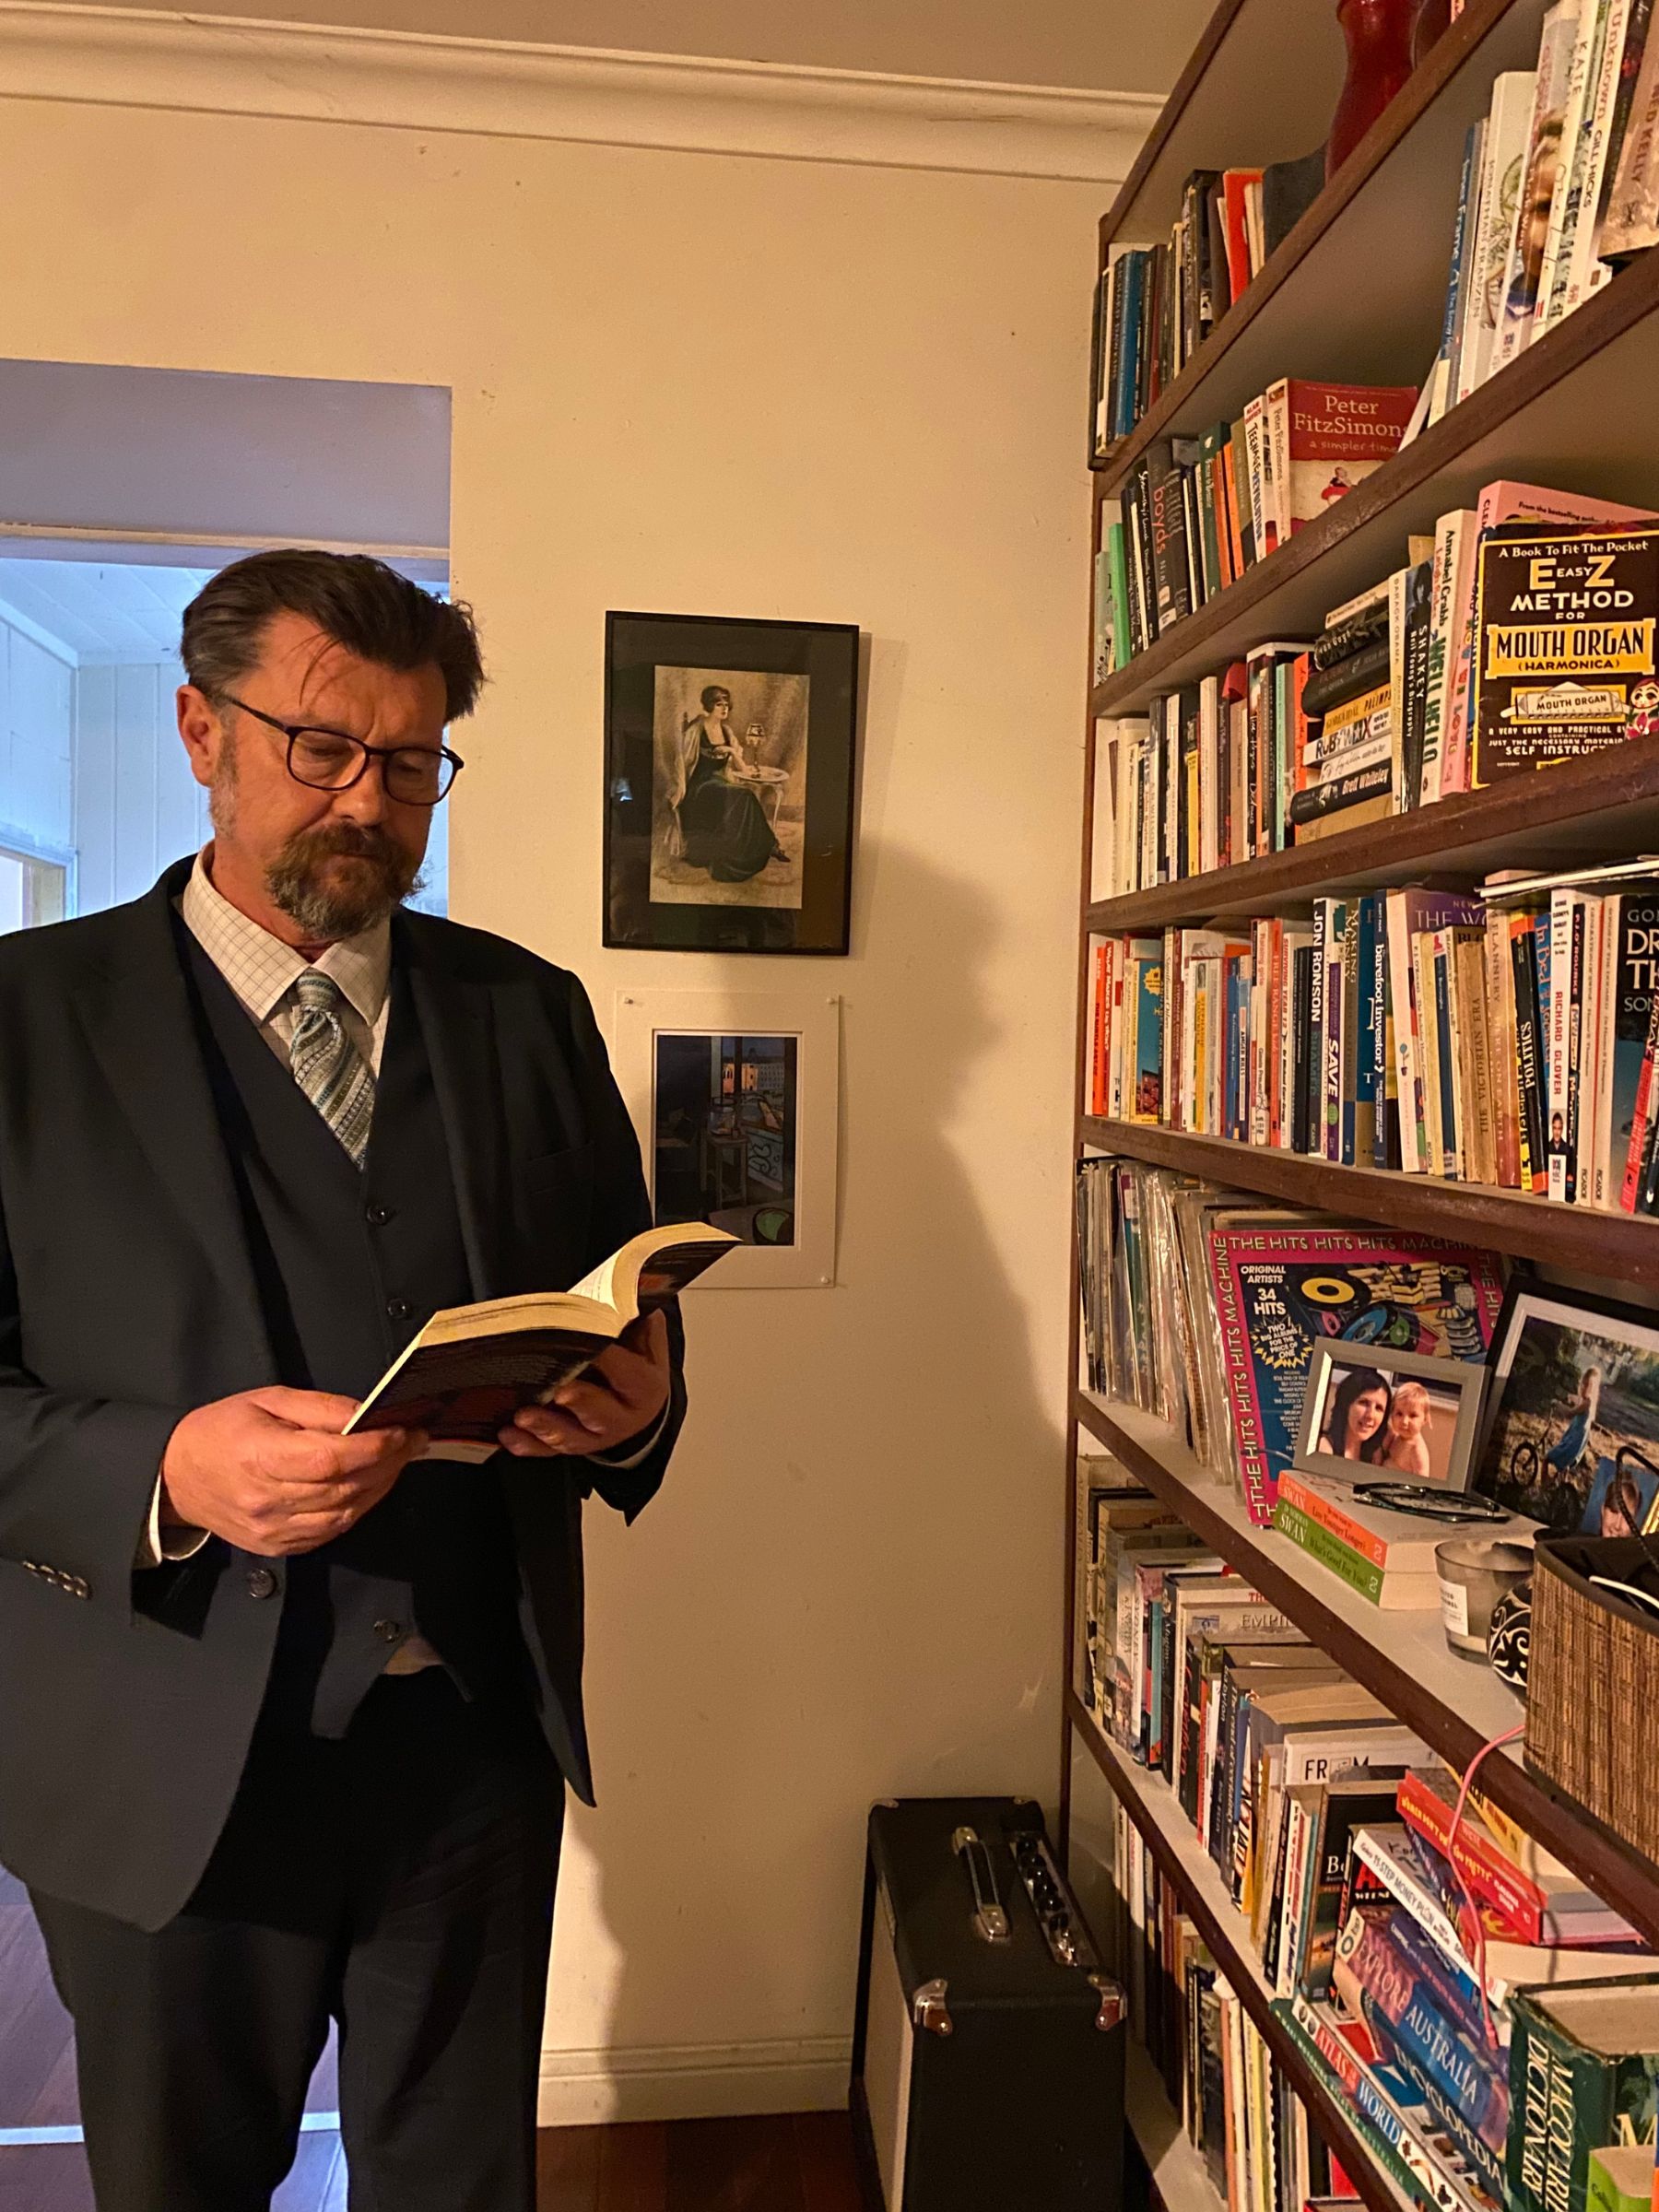 A man is standing in front of a book case and is holding a novel wearing a suit. he is wearing glasses.